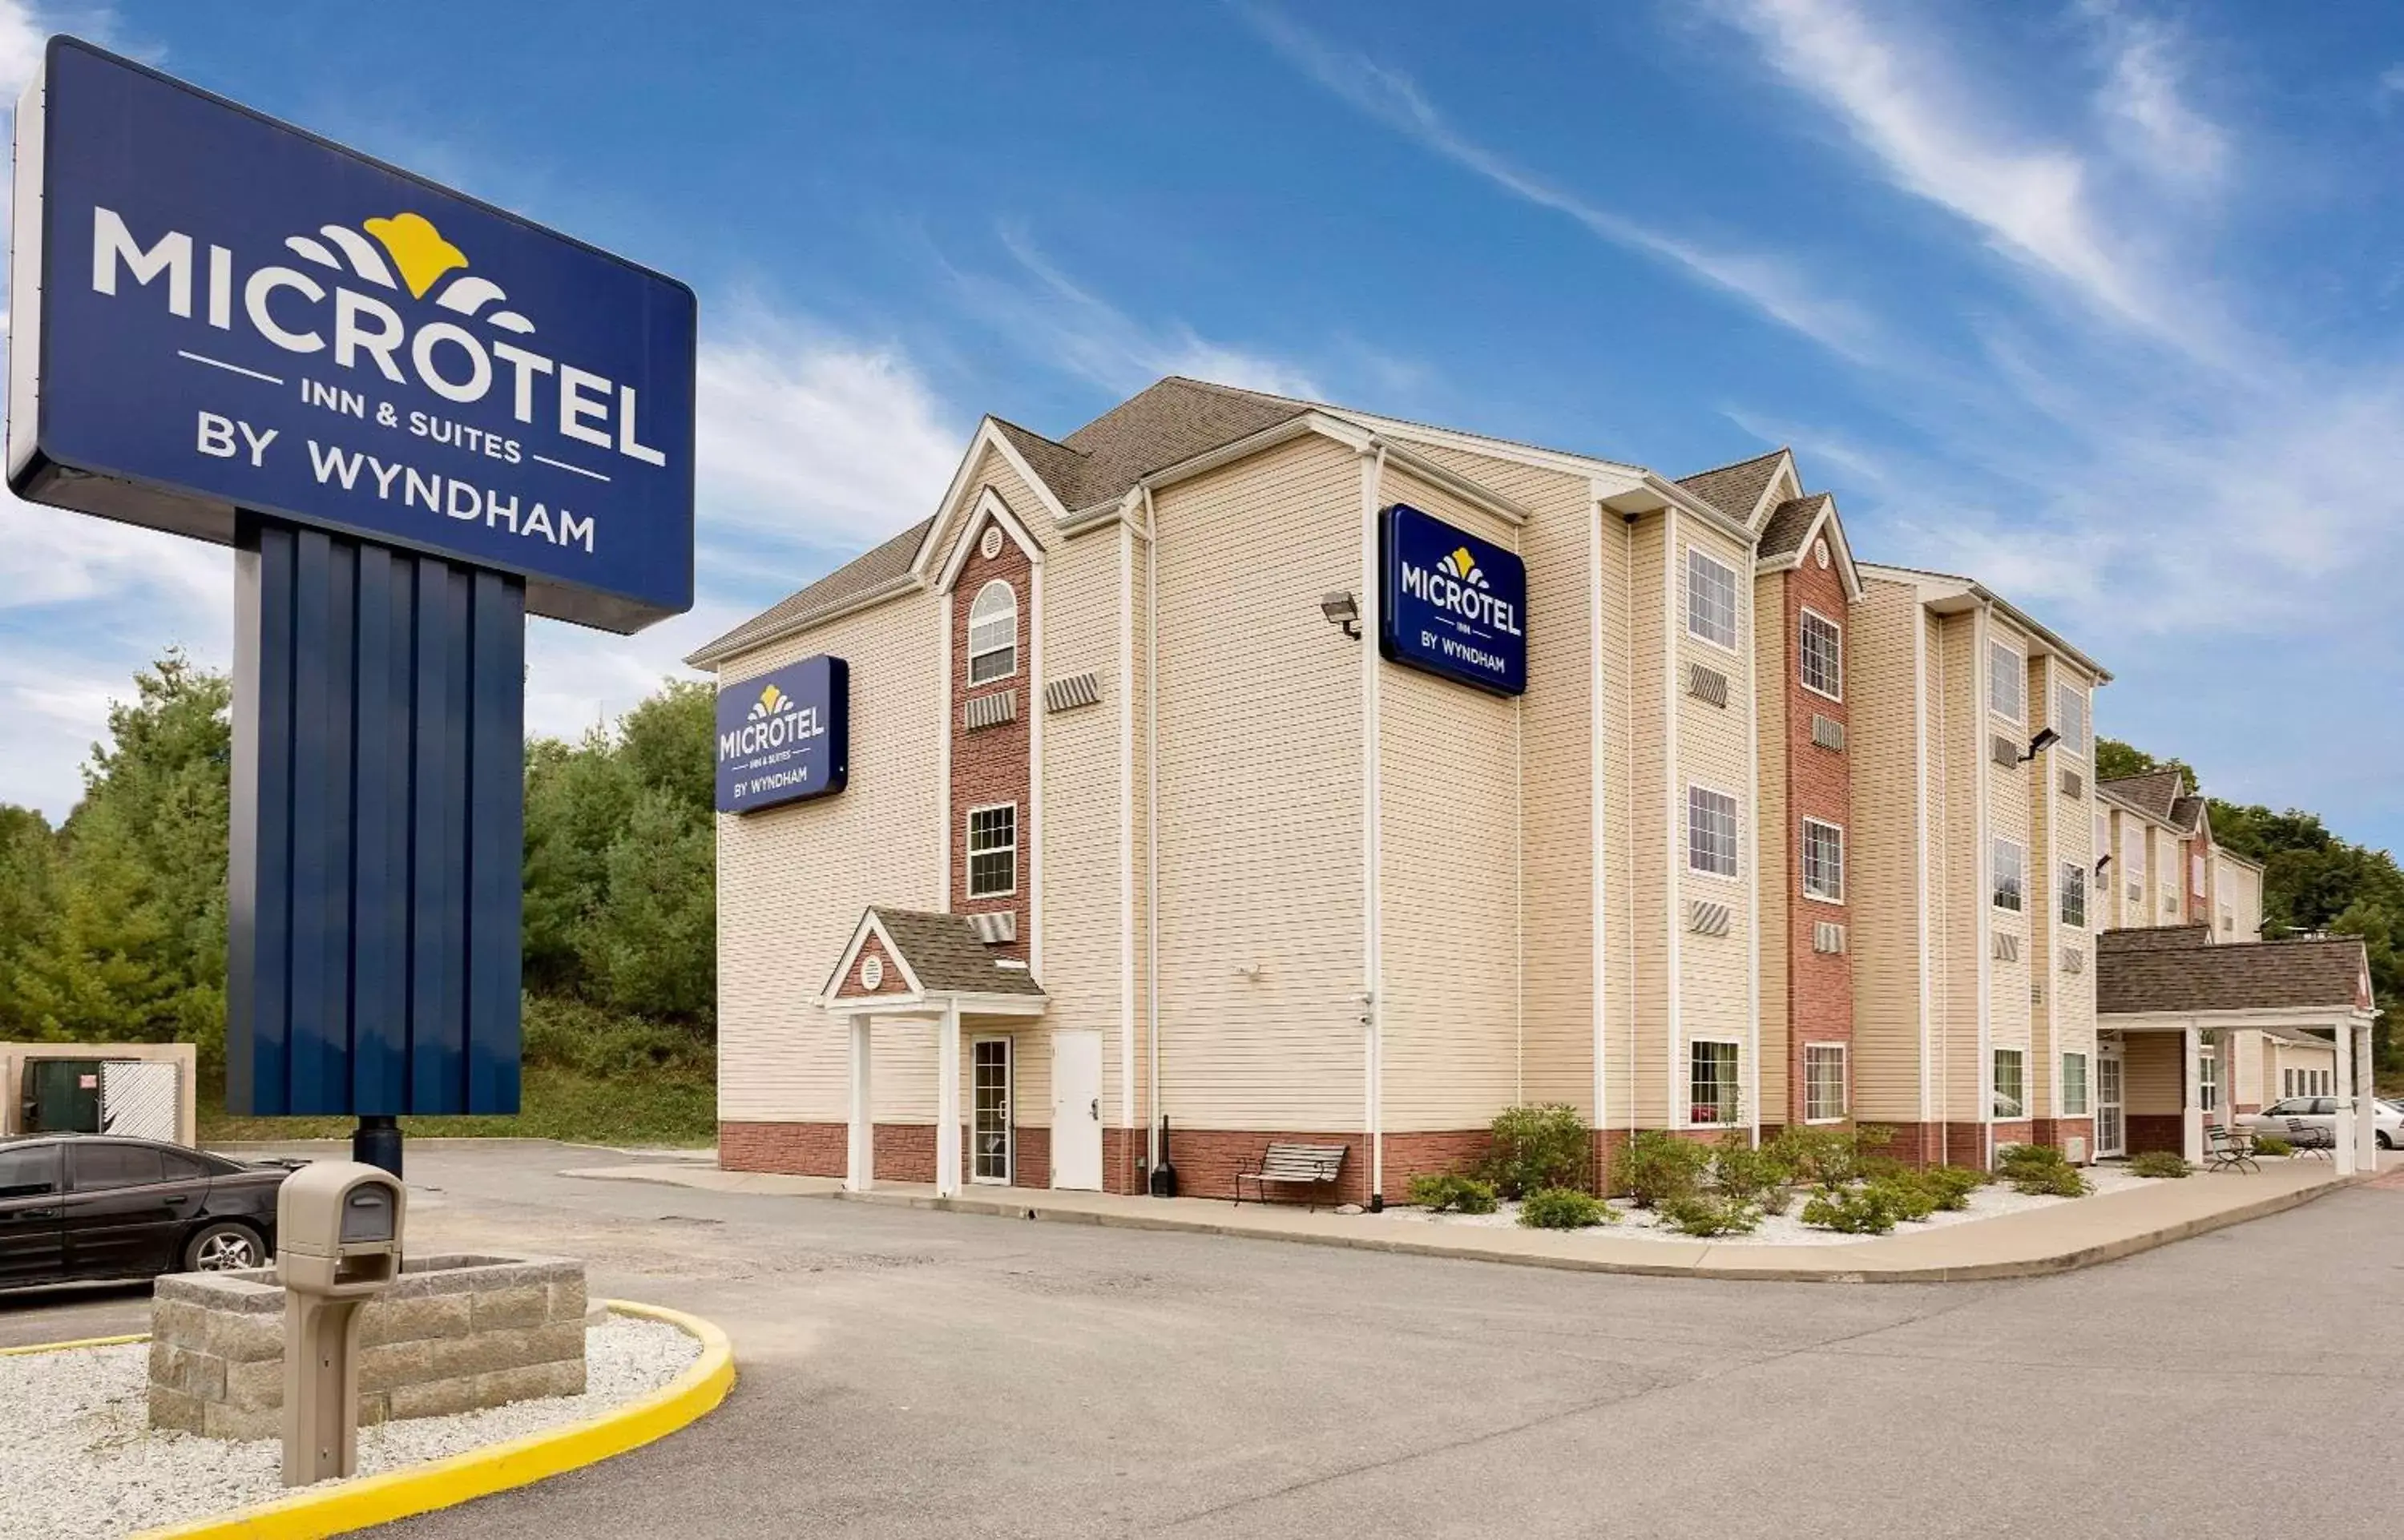 Property building in Microtel Inn & Suites by Wyndham Princeton